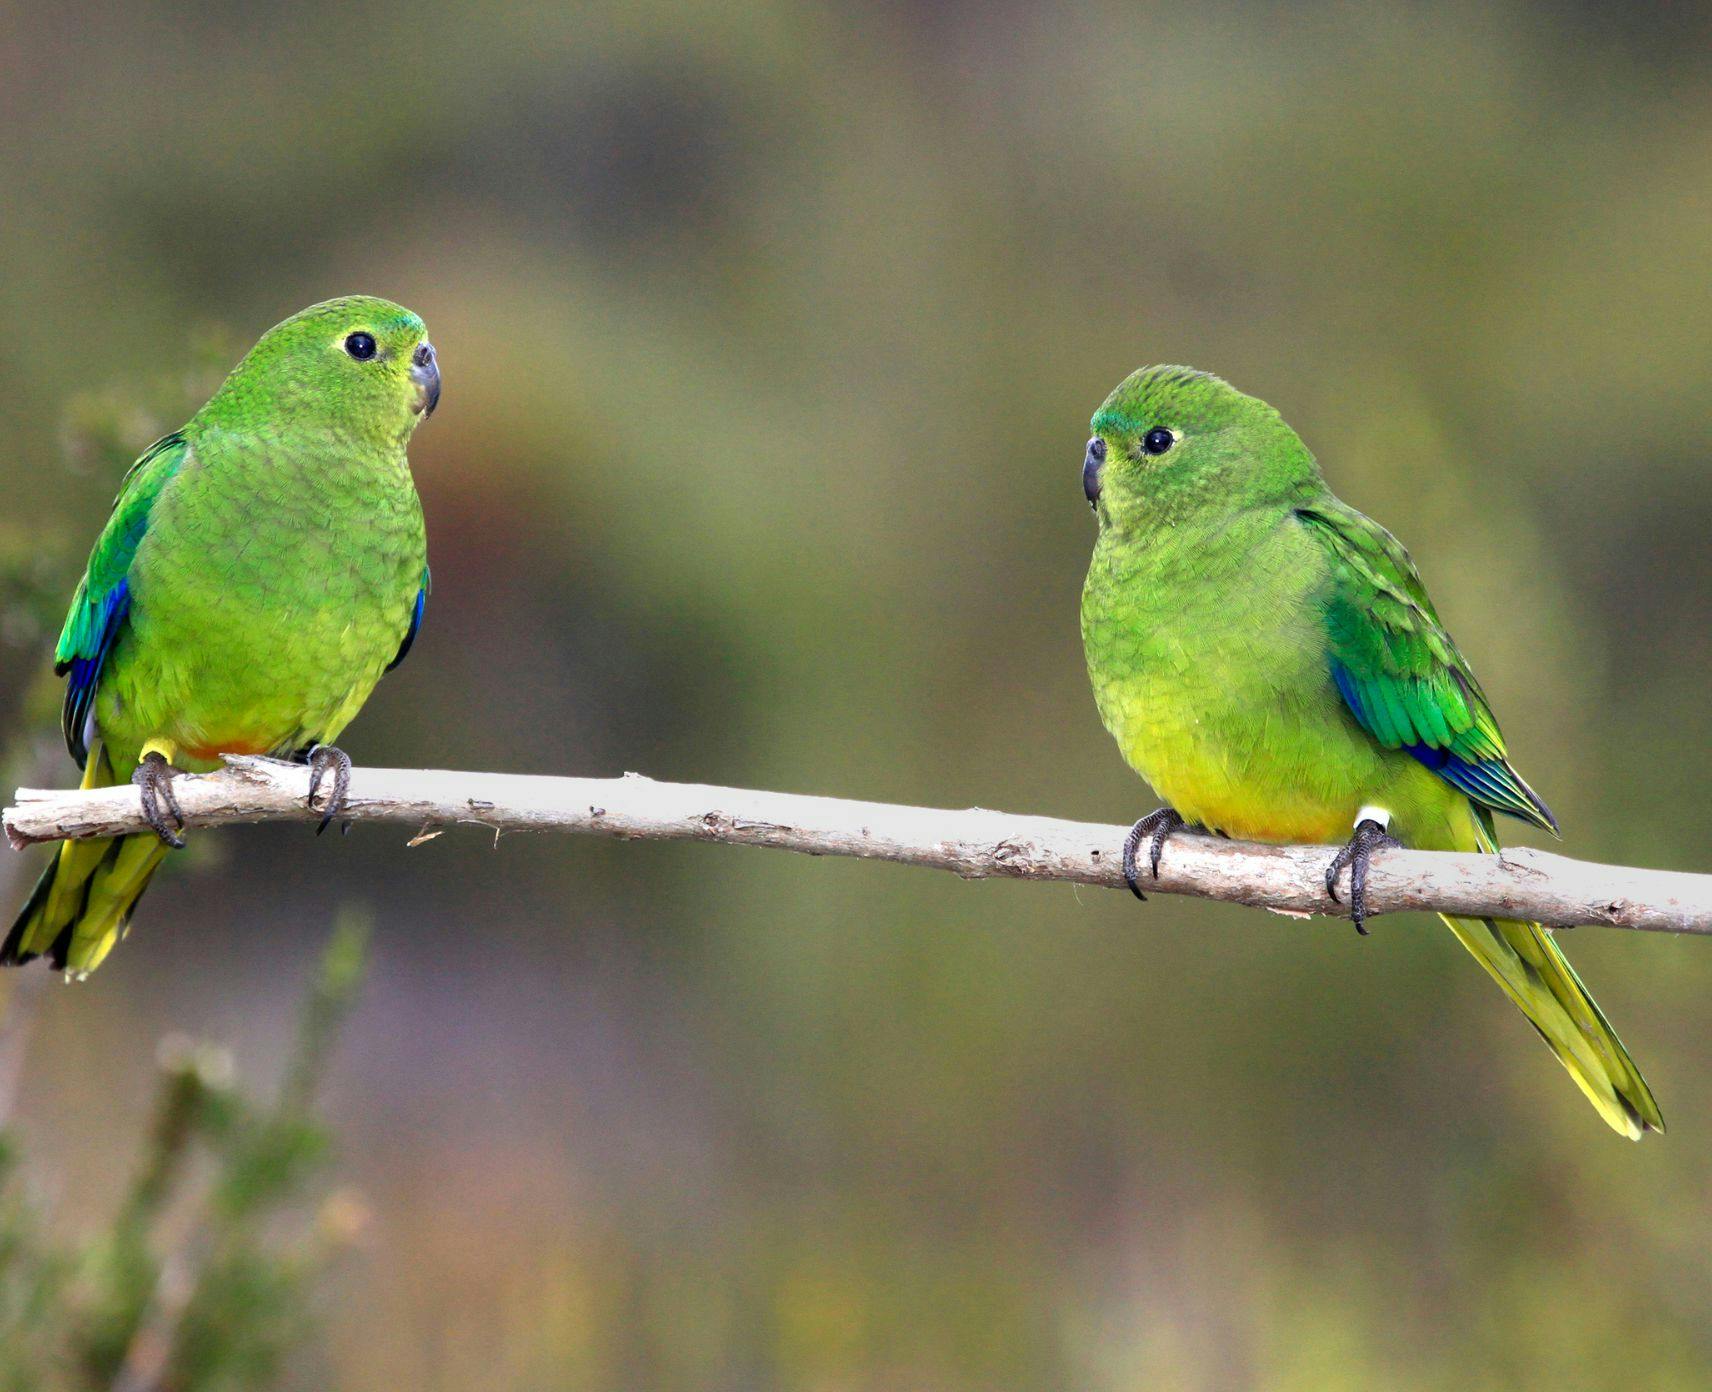 Two orange-bellied parrots sitting on a tree branch.